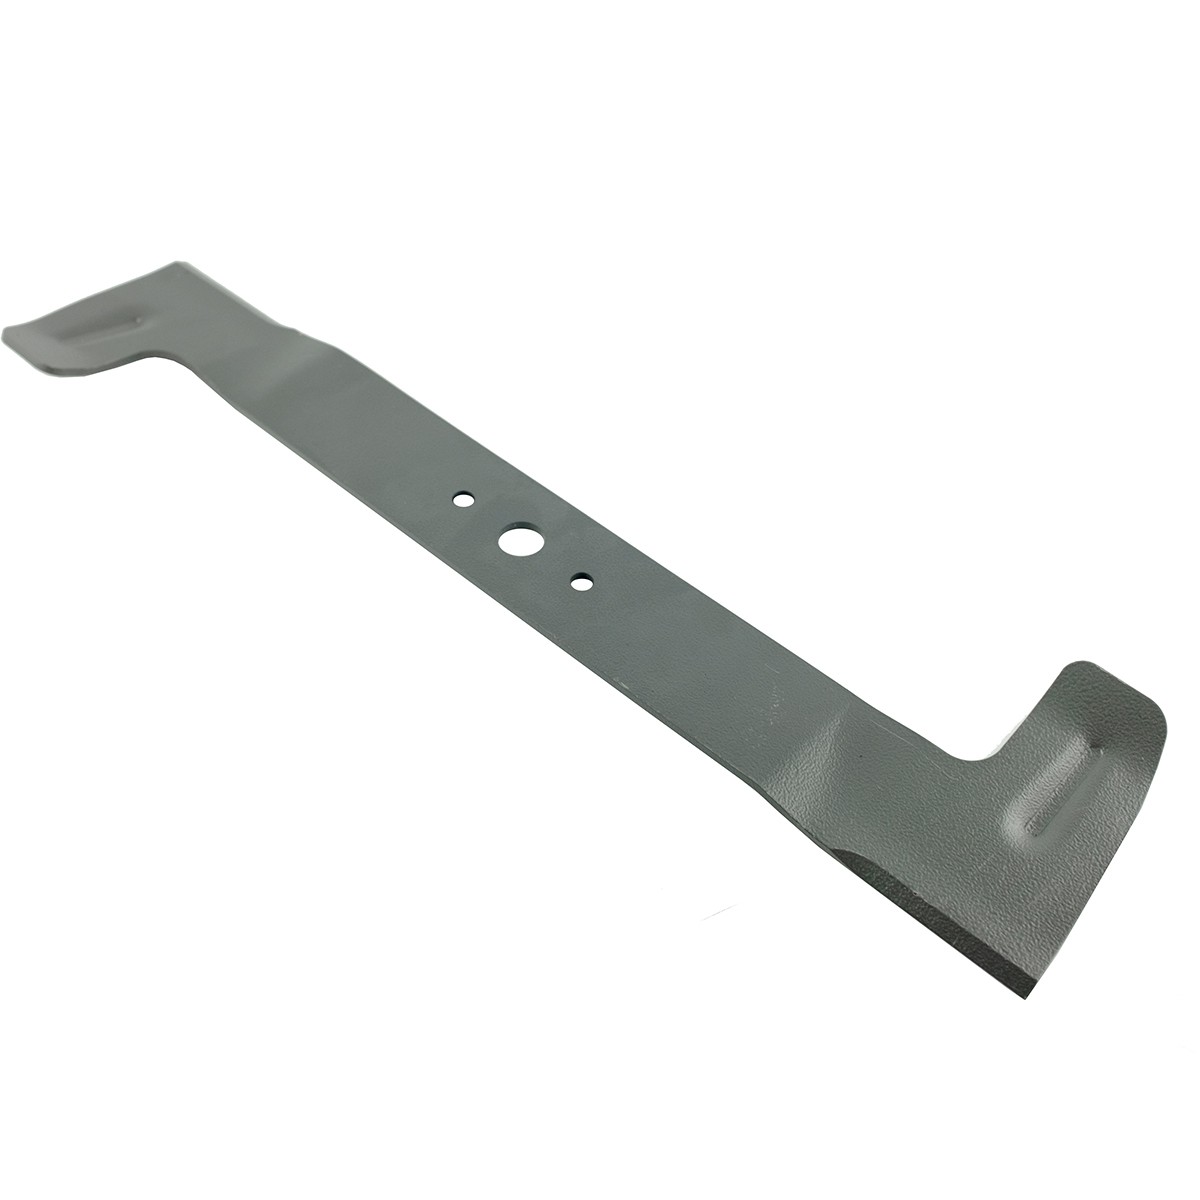 510 mm blade for the Iseki SW 432 A, SW 4753 A, 81004398/0 mower